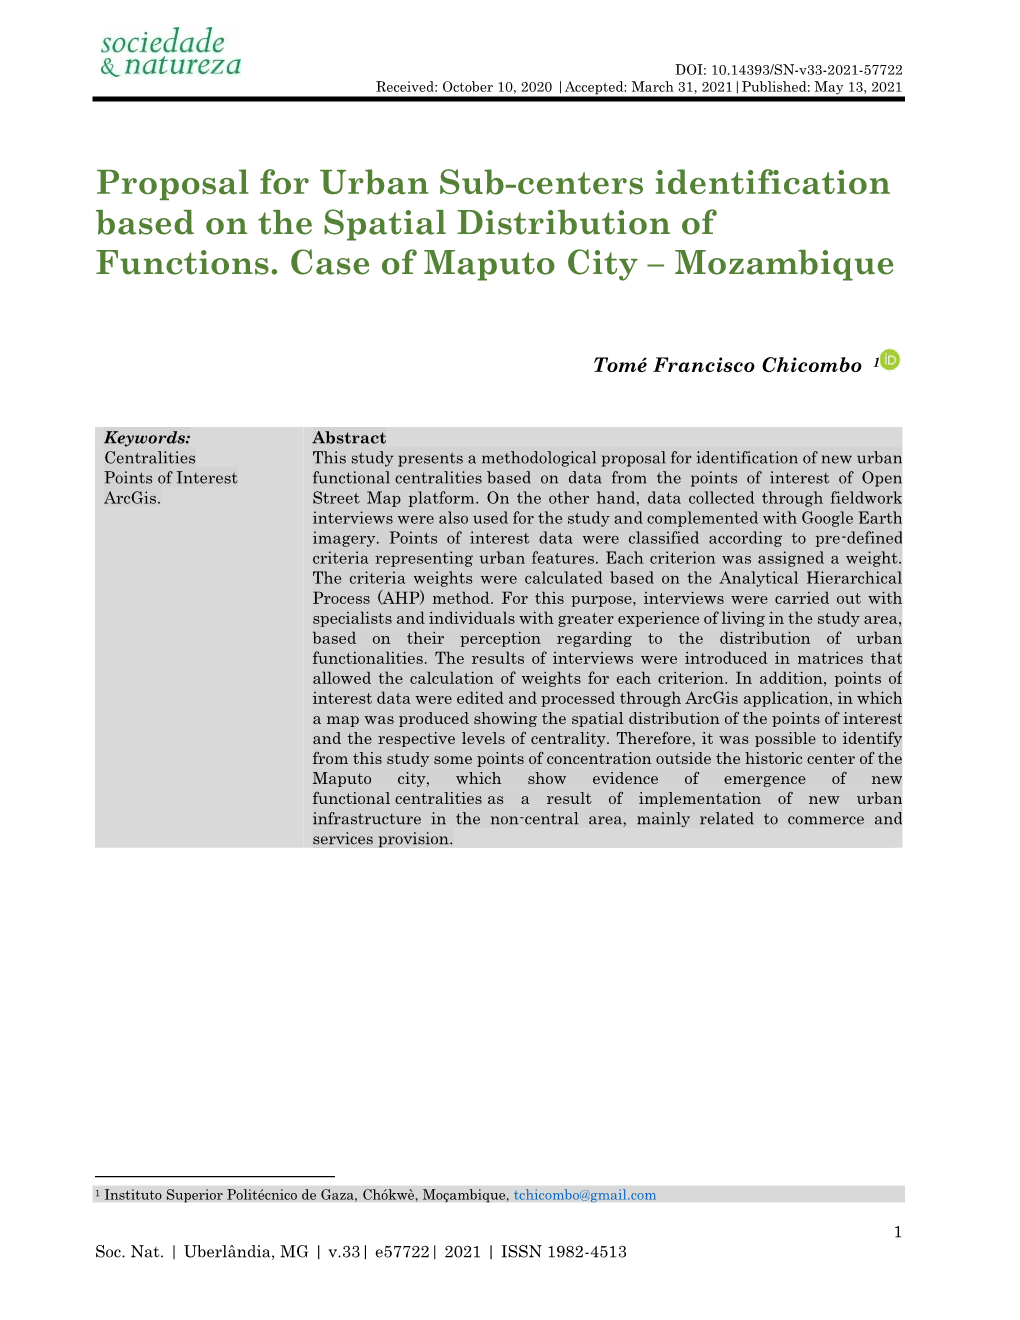 Proposal for Urban Sub-Centers Identification Based on the Spatial Distribution of Functions